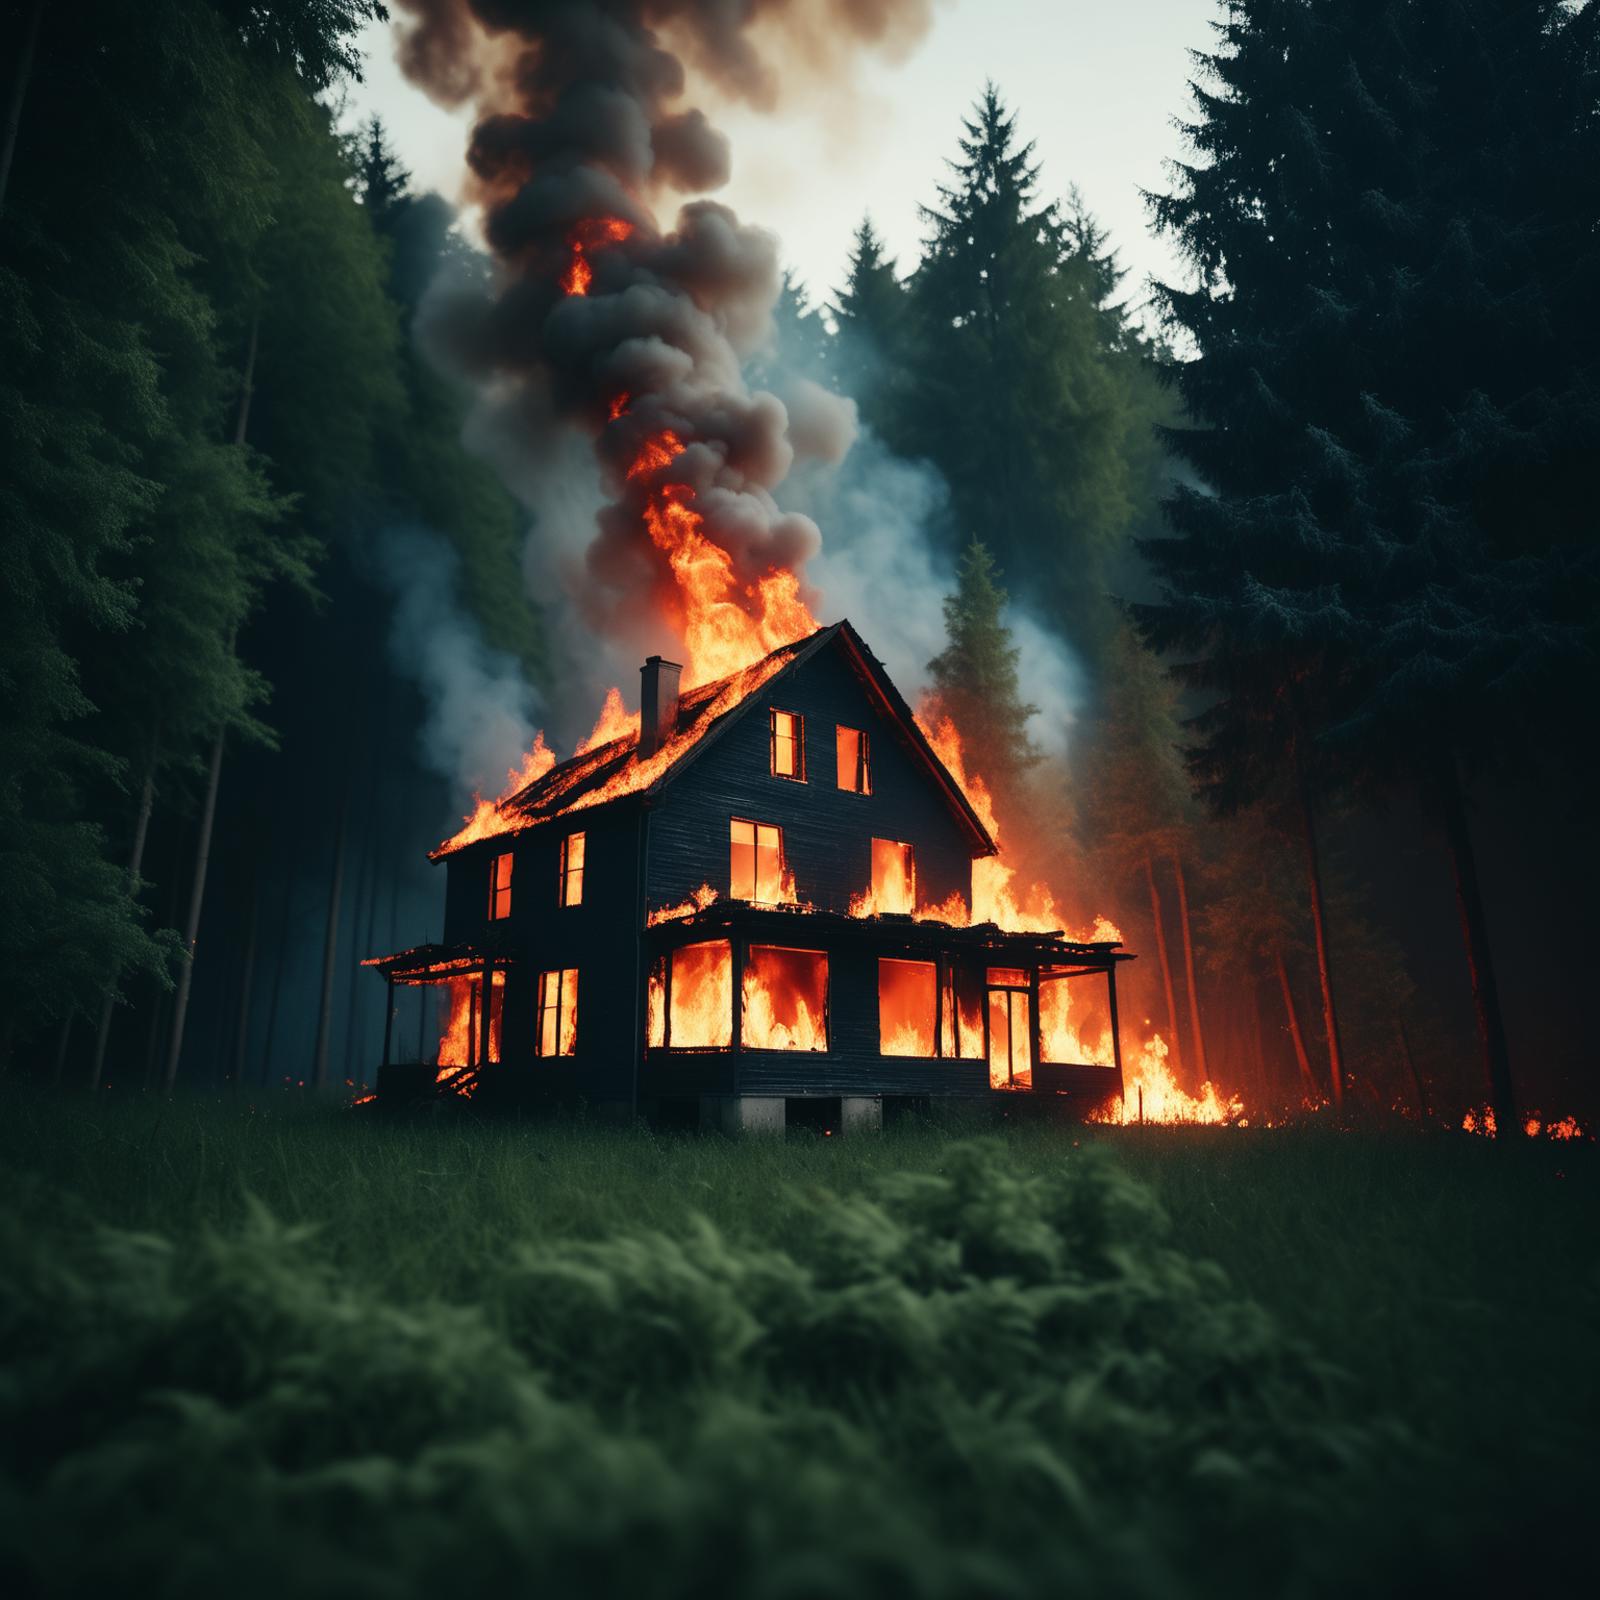 Black and white image of a burning house surrounded by trees and smoke.